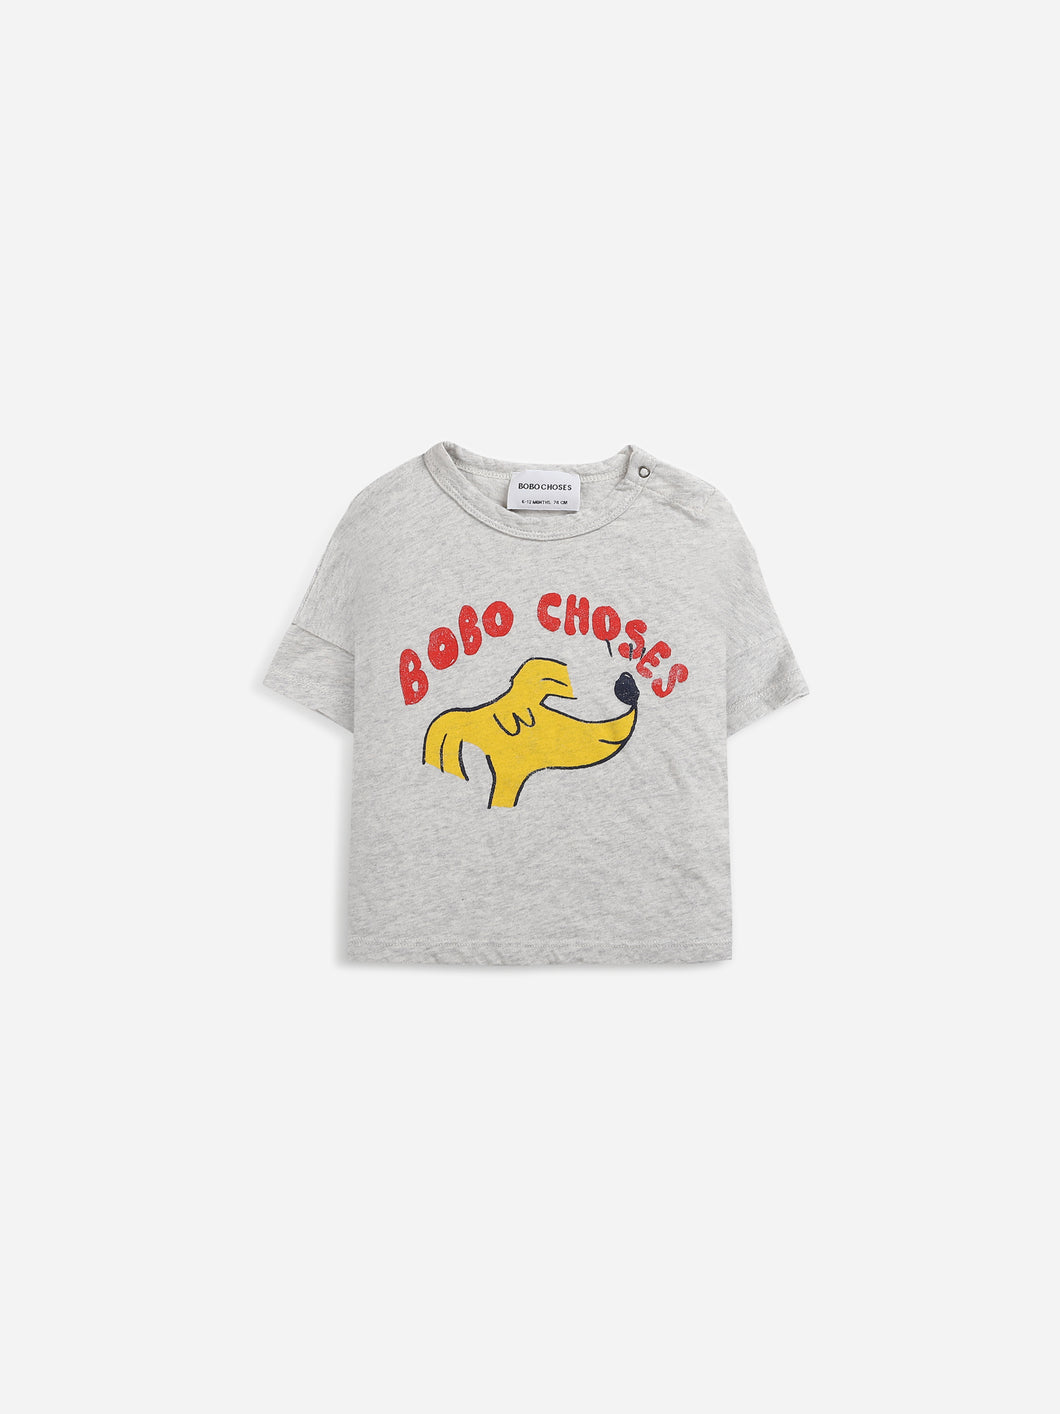 Sniffy Dog short sleeve T-shirt / ボボショーズ Baby